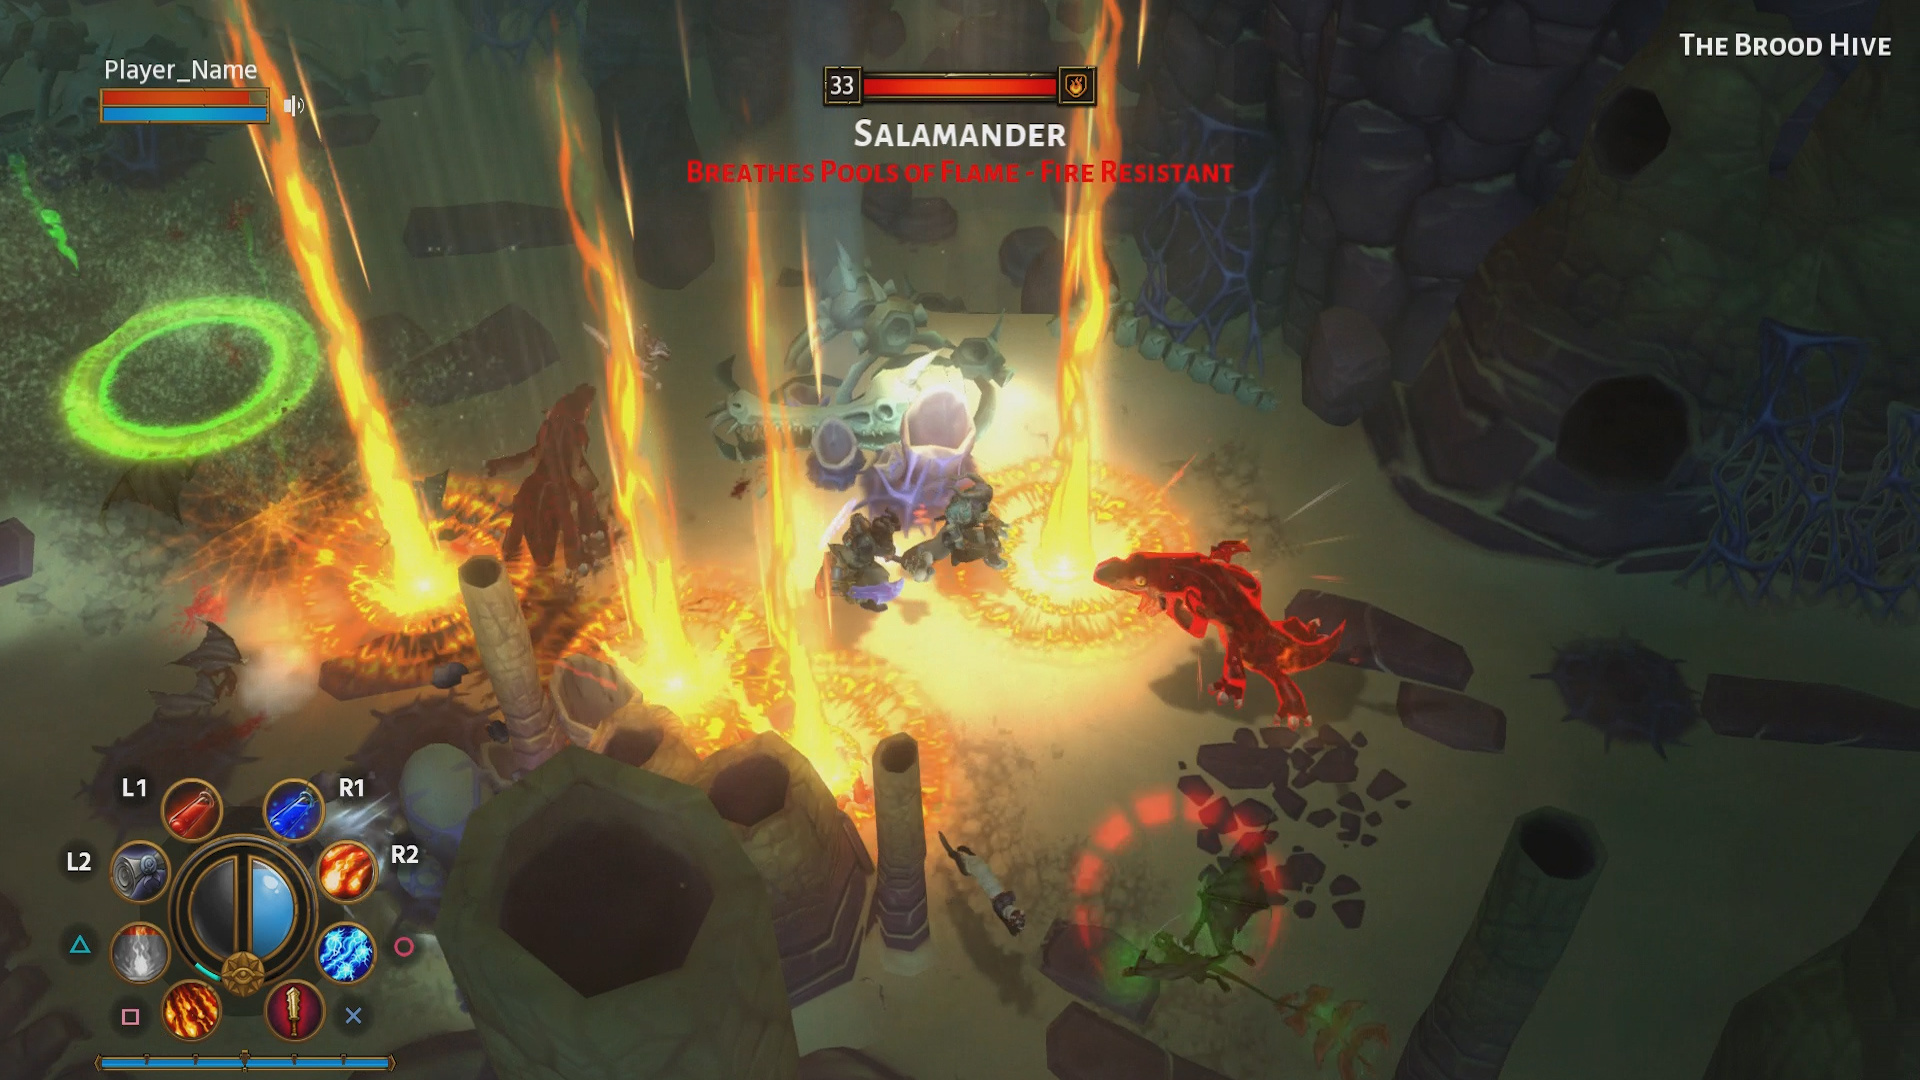 torchlight 2 review switch